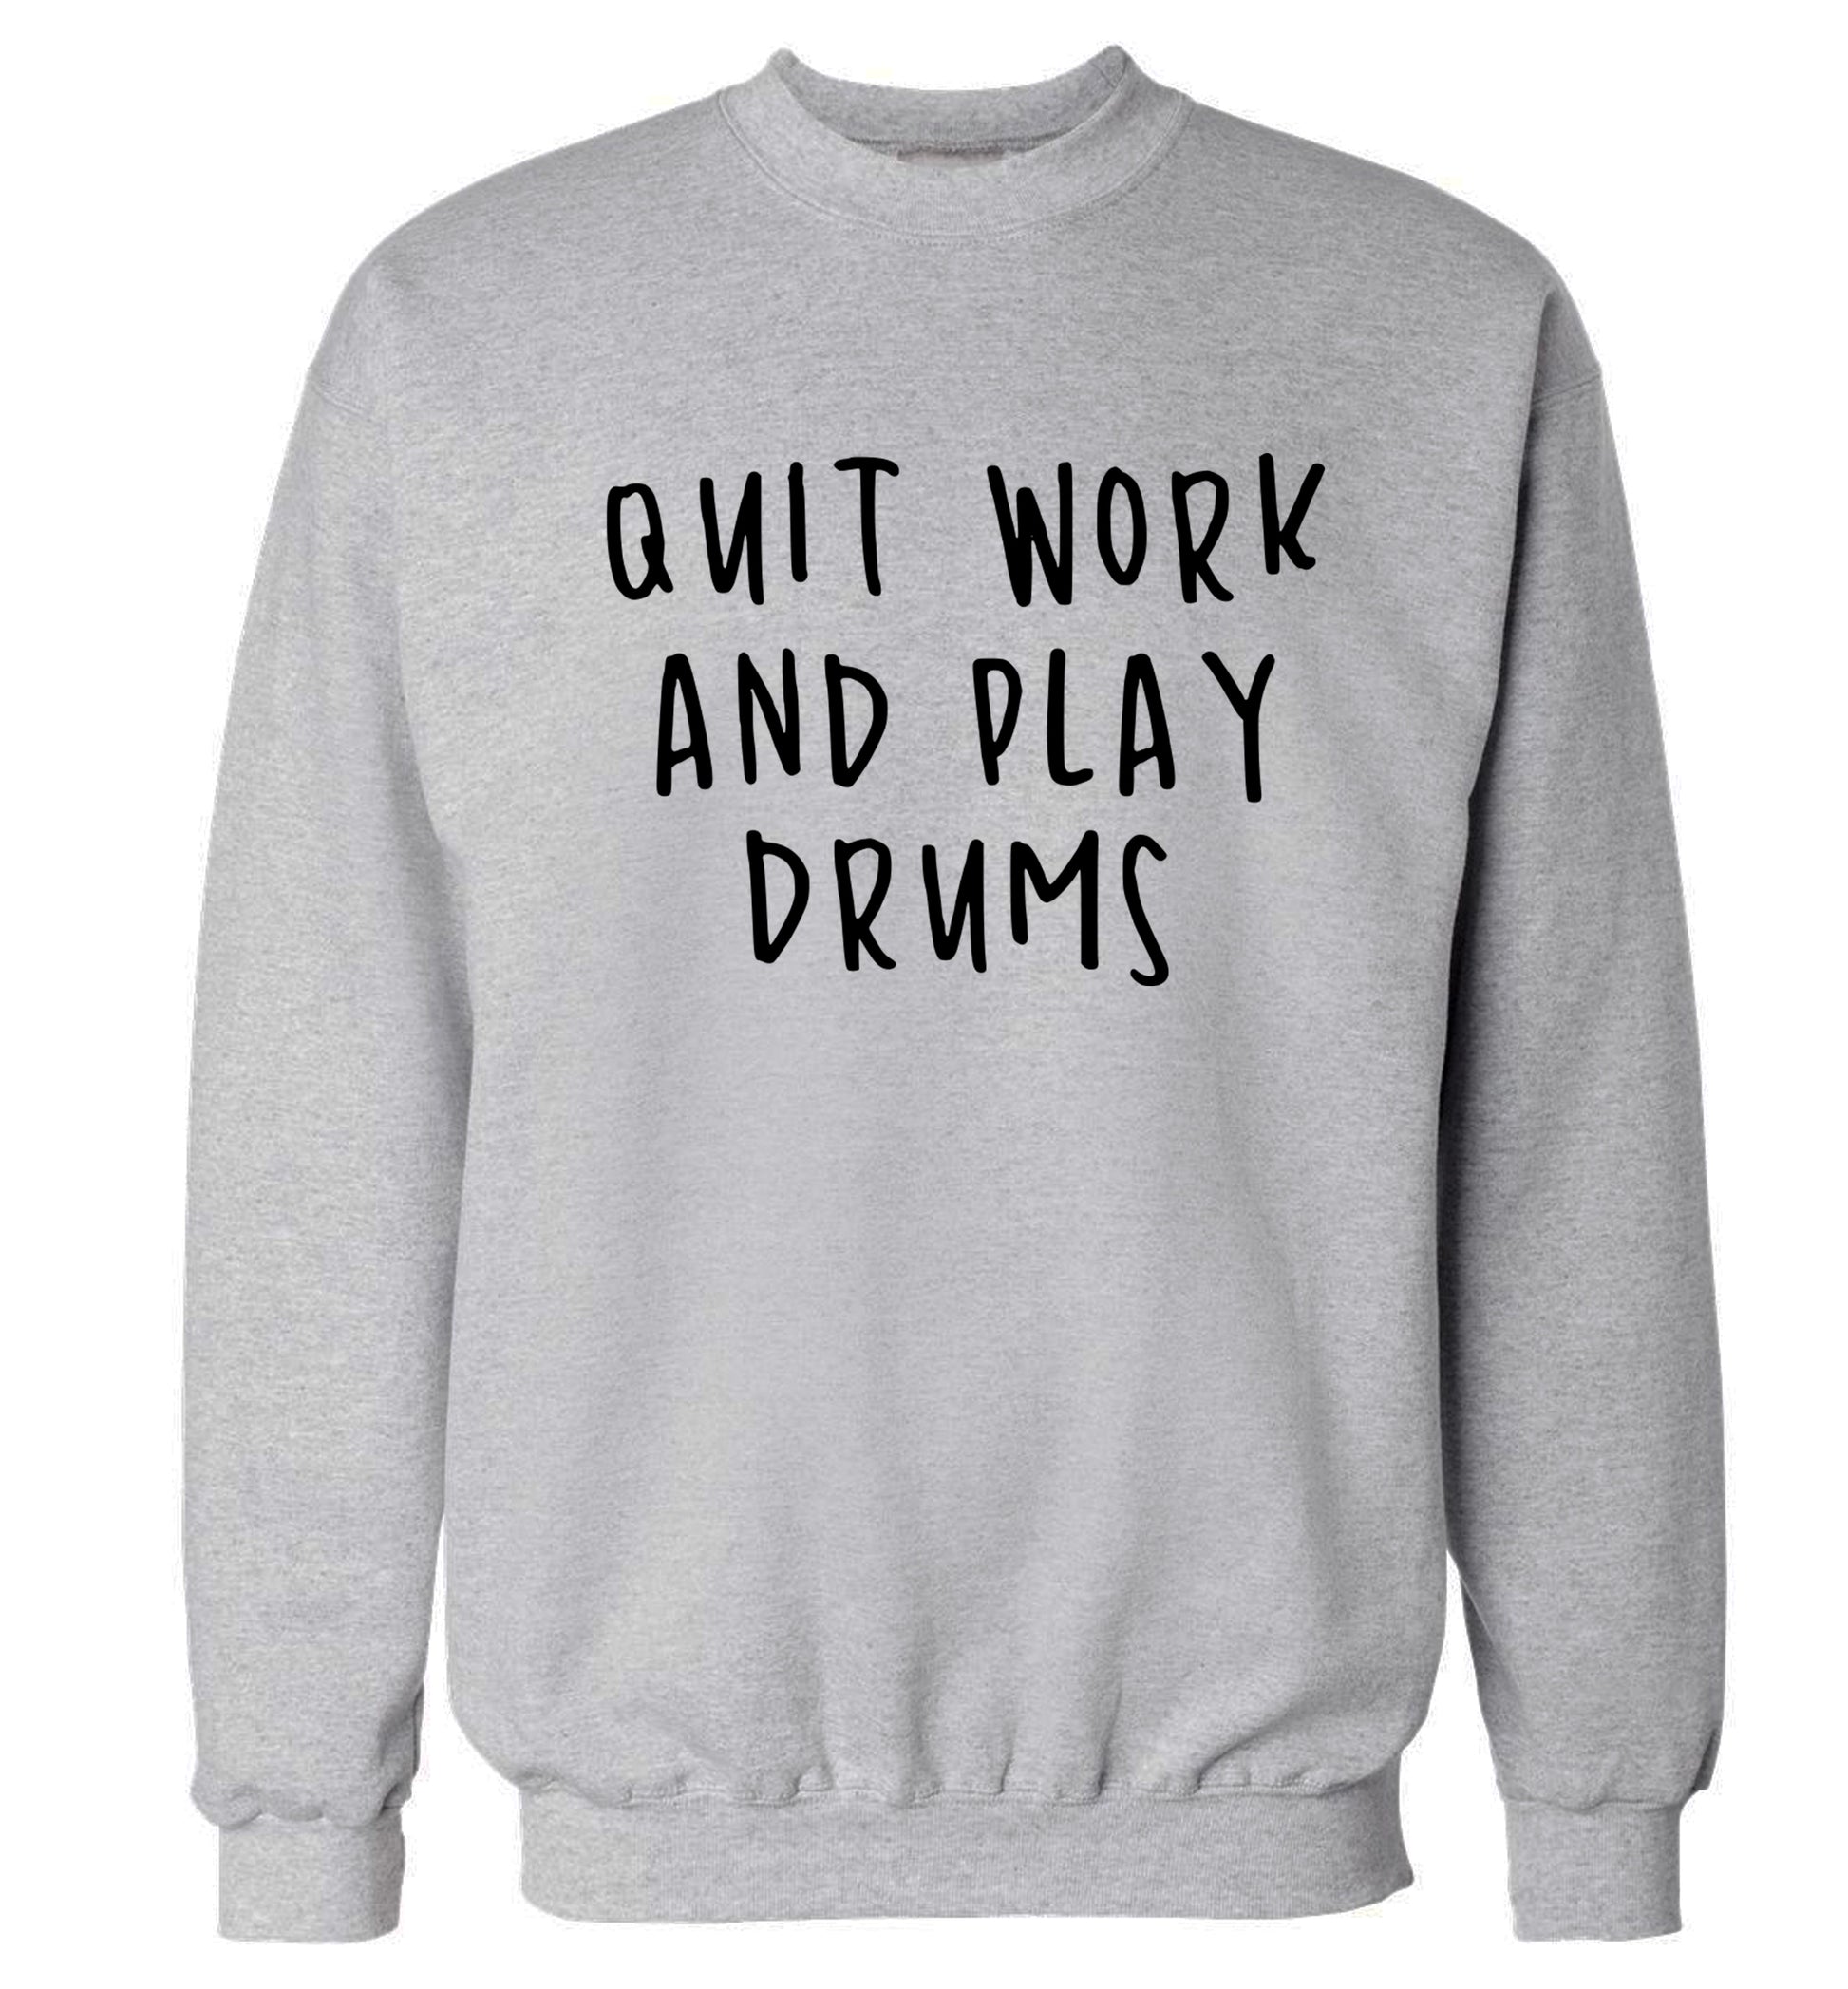 Quit work and play drums Adult's unisex grey Sweater 2XL